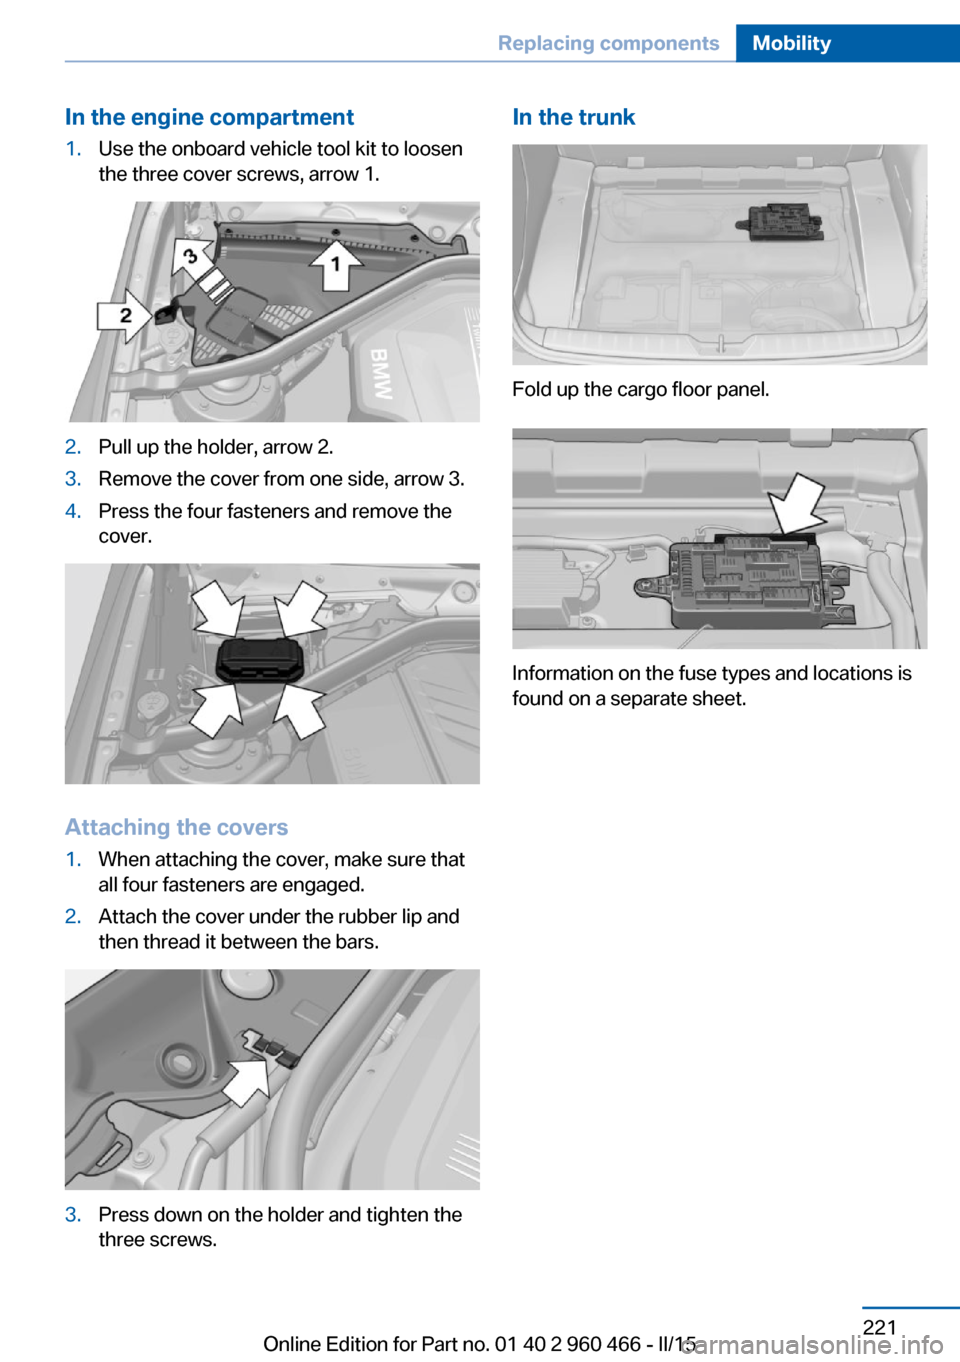 BMW ACTIVE HYBRID 3 2015 F30H Owners Manual In the engine compartment1.Use the onboard vehicle tool kit to loosen
the three cover screws, arrow 1.2.Pull up the holder, arrow 2.3.Remove the cover from one side, arrow 3.4.Press the four fasteners